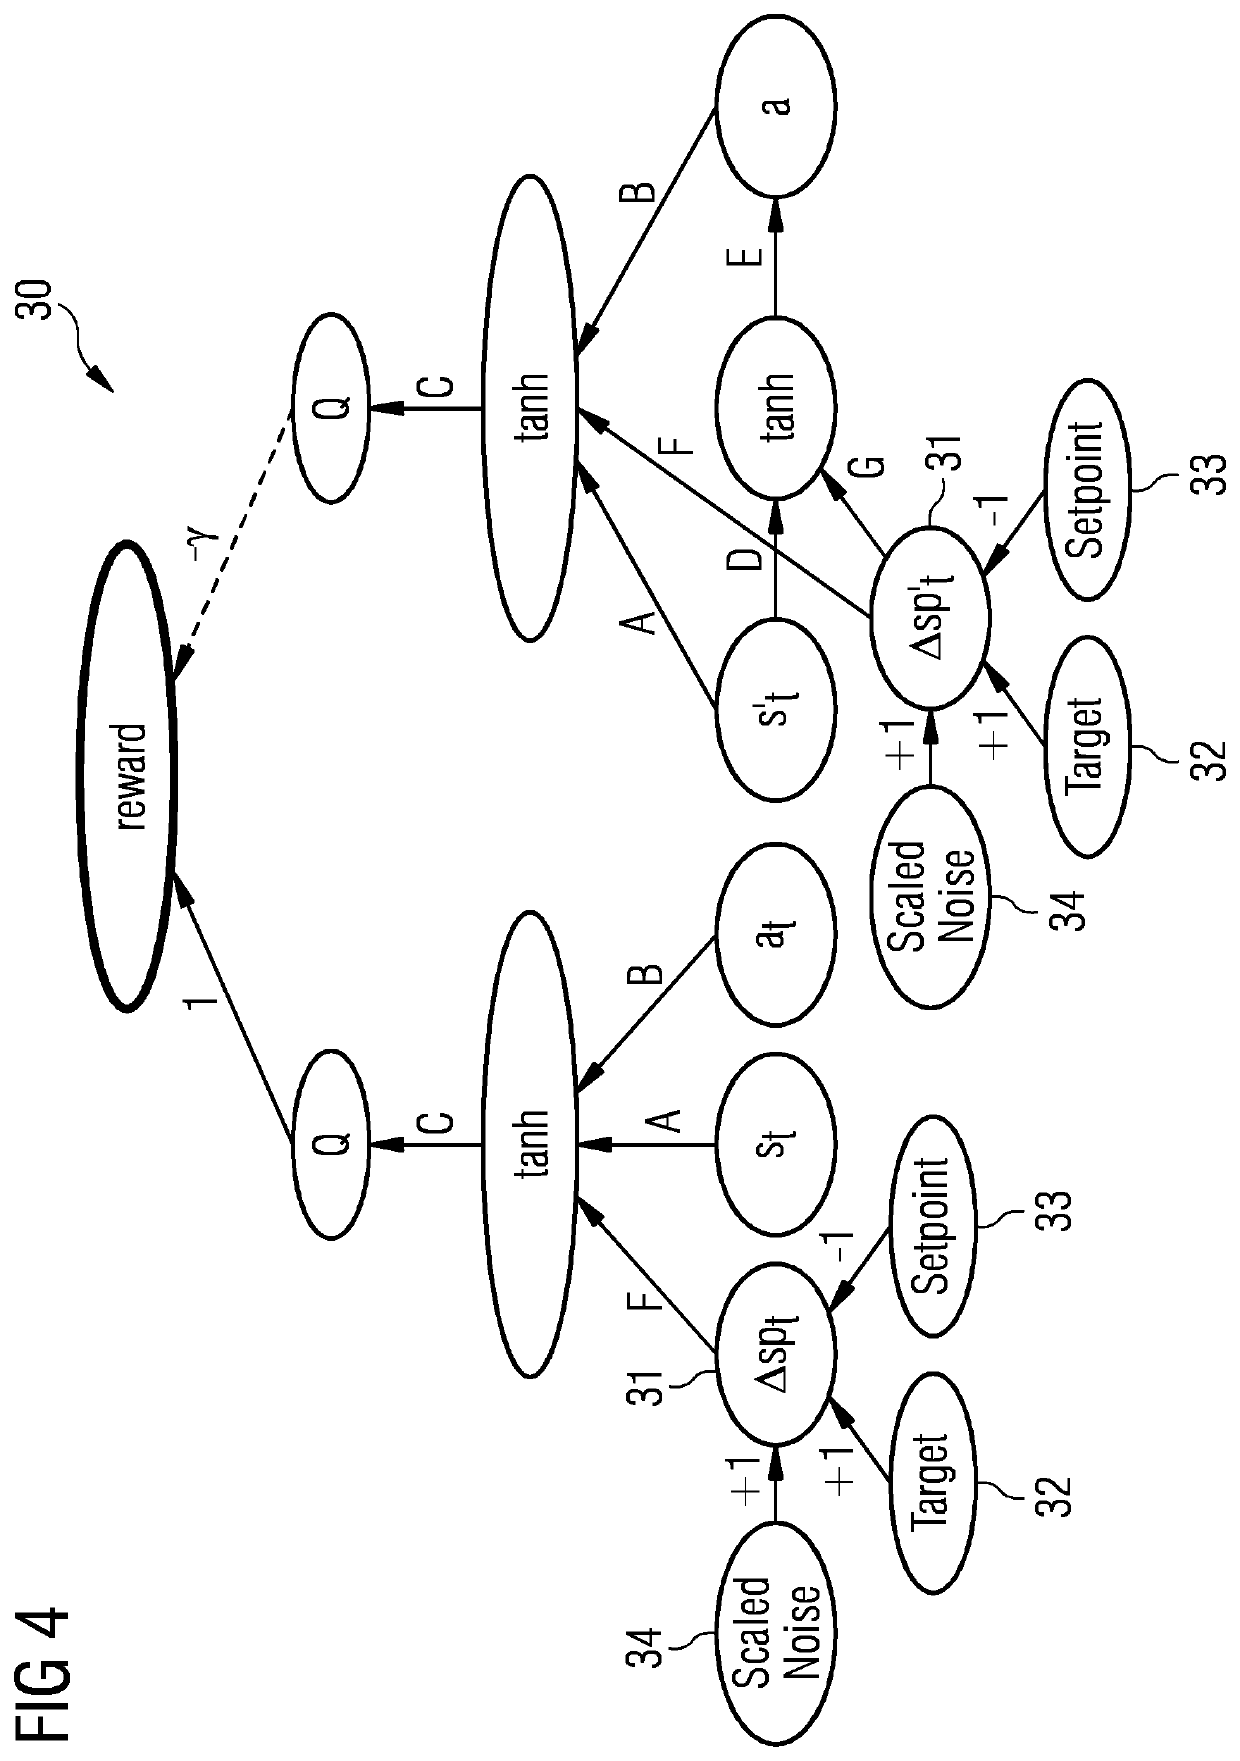 Randomized reinforcement learning for control of complex systems